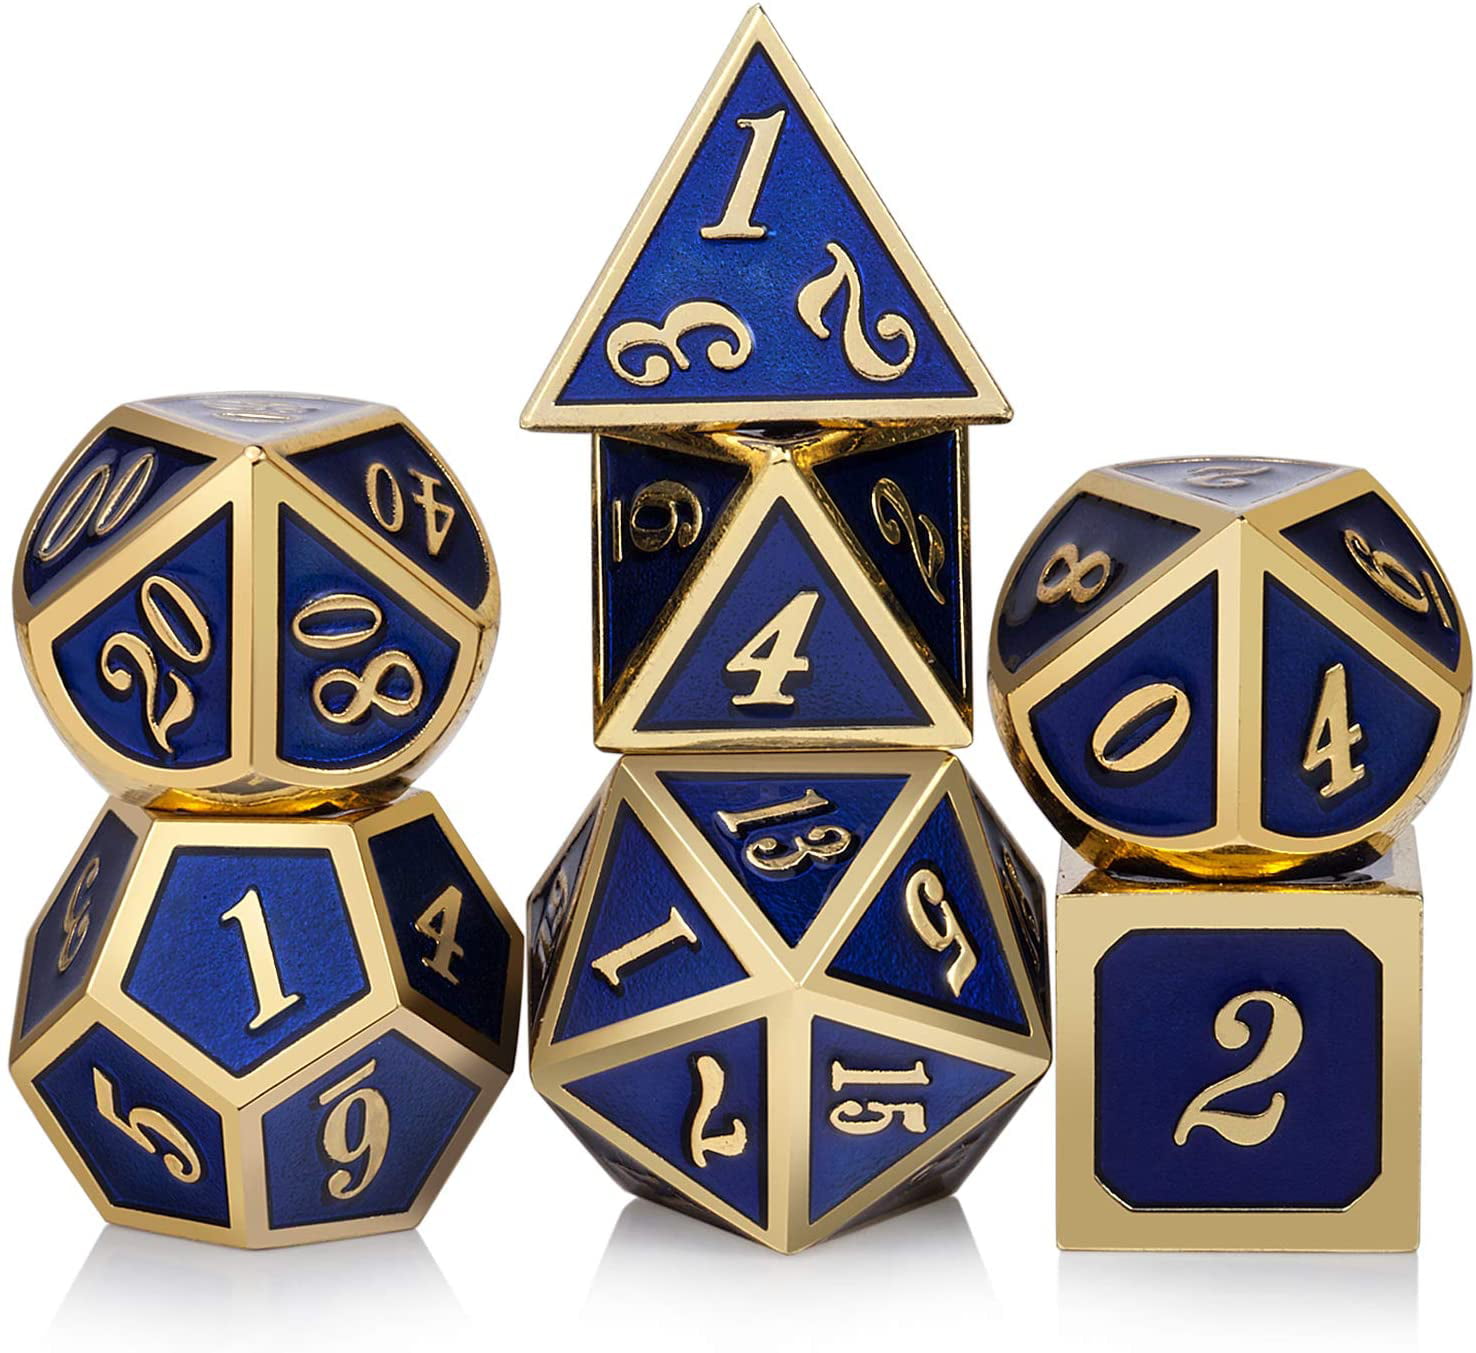 DND Polyhedral Metal Dice Set D&D 7pcs with Storage Bag for Dungeons and Dragons RPG MTG Table Games Pathfinder Shadowrun-Black with Gold Number 